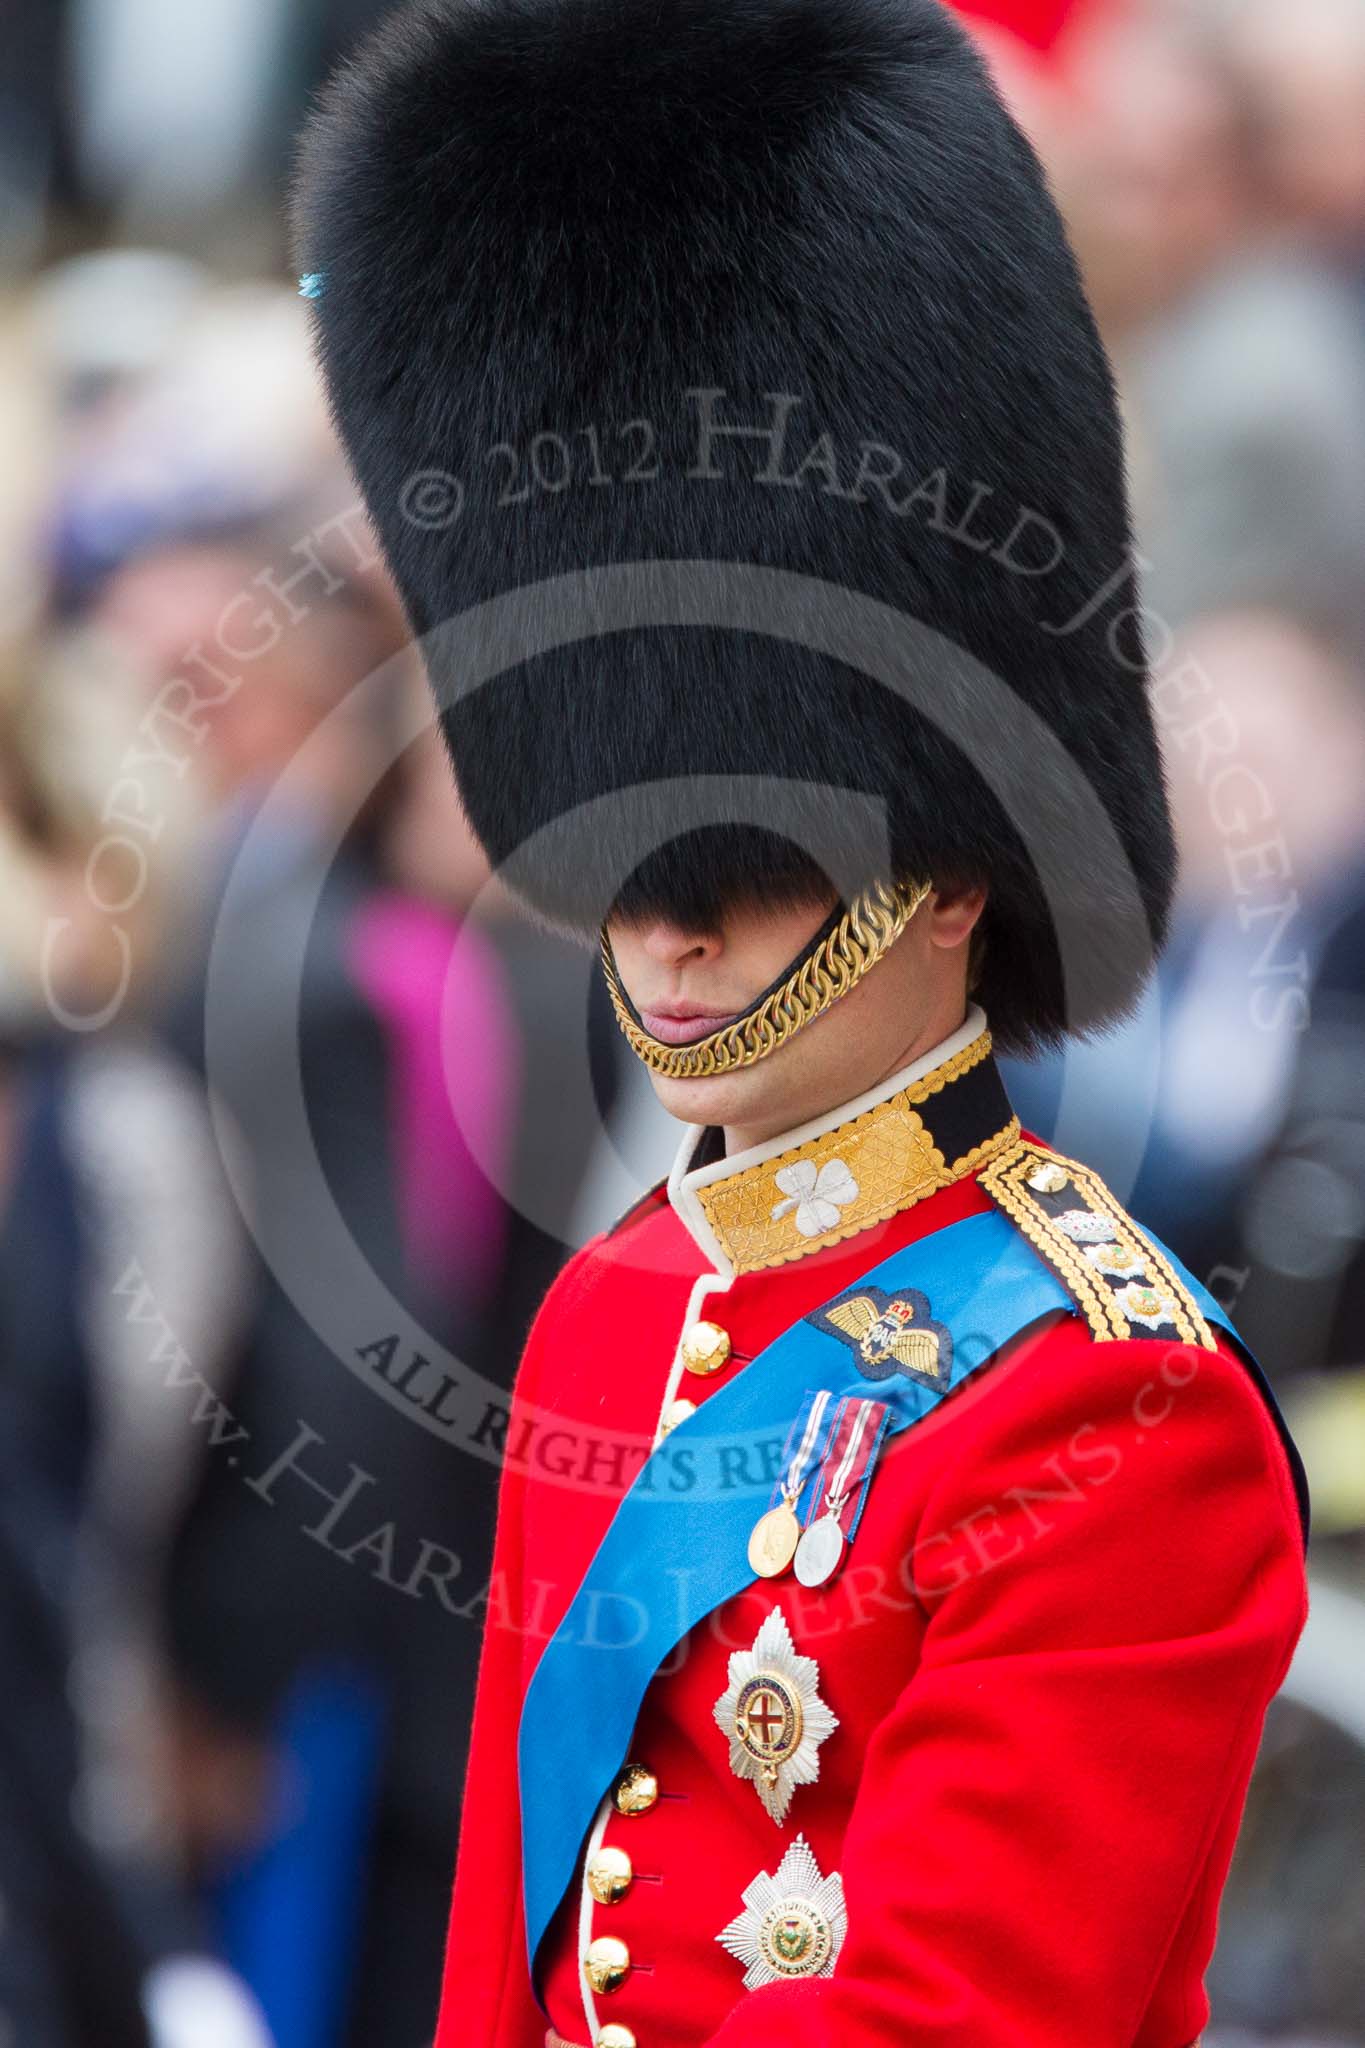 Trooping the Colour 2012: His Royal Highness The Duke of Cambridge,
Colonel Irish Guards.
Horse Guards Parade, Westminster,
London SW1,

United Kingdom,
on 16 June 2012 at 11:01, image #190